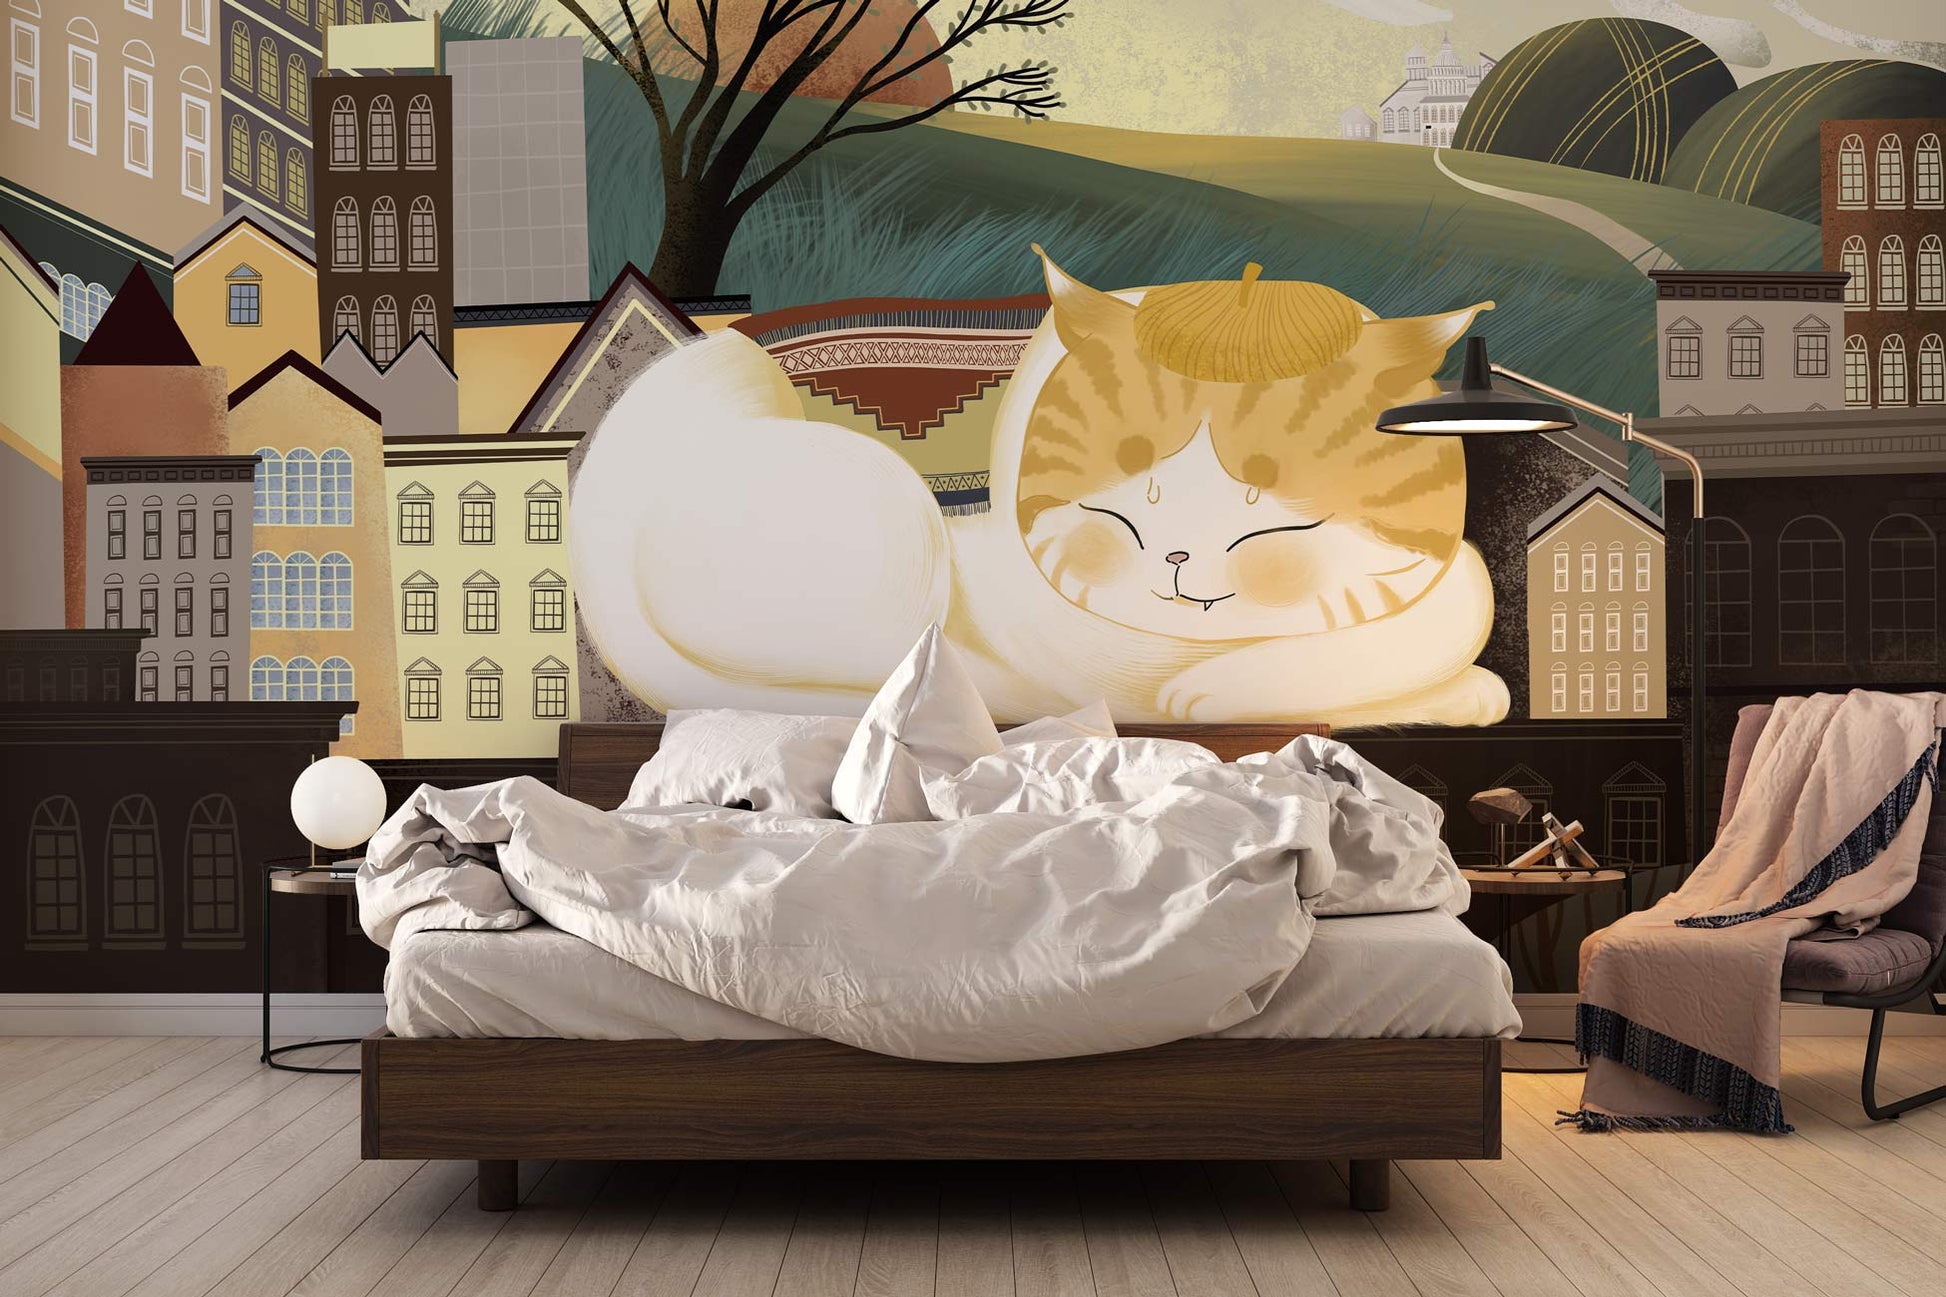 Wallpaper Mural of a Cat Sleeping on a Rooftop for Bedroom